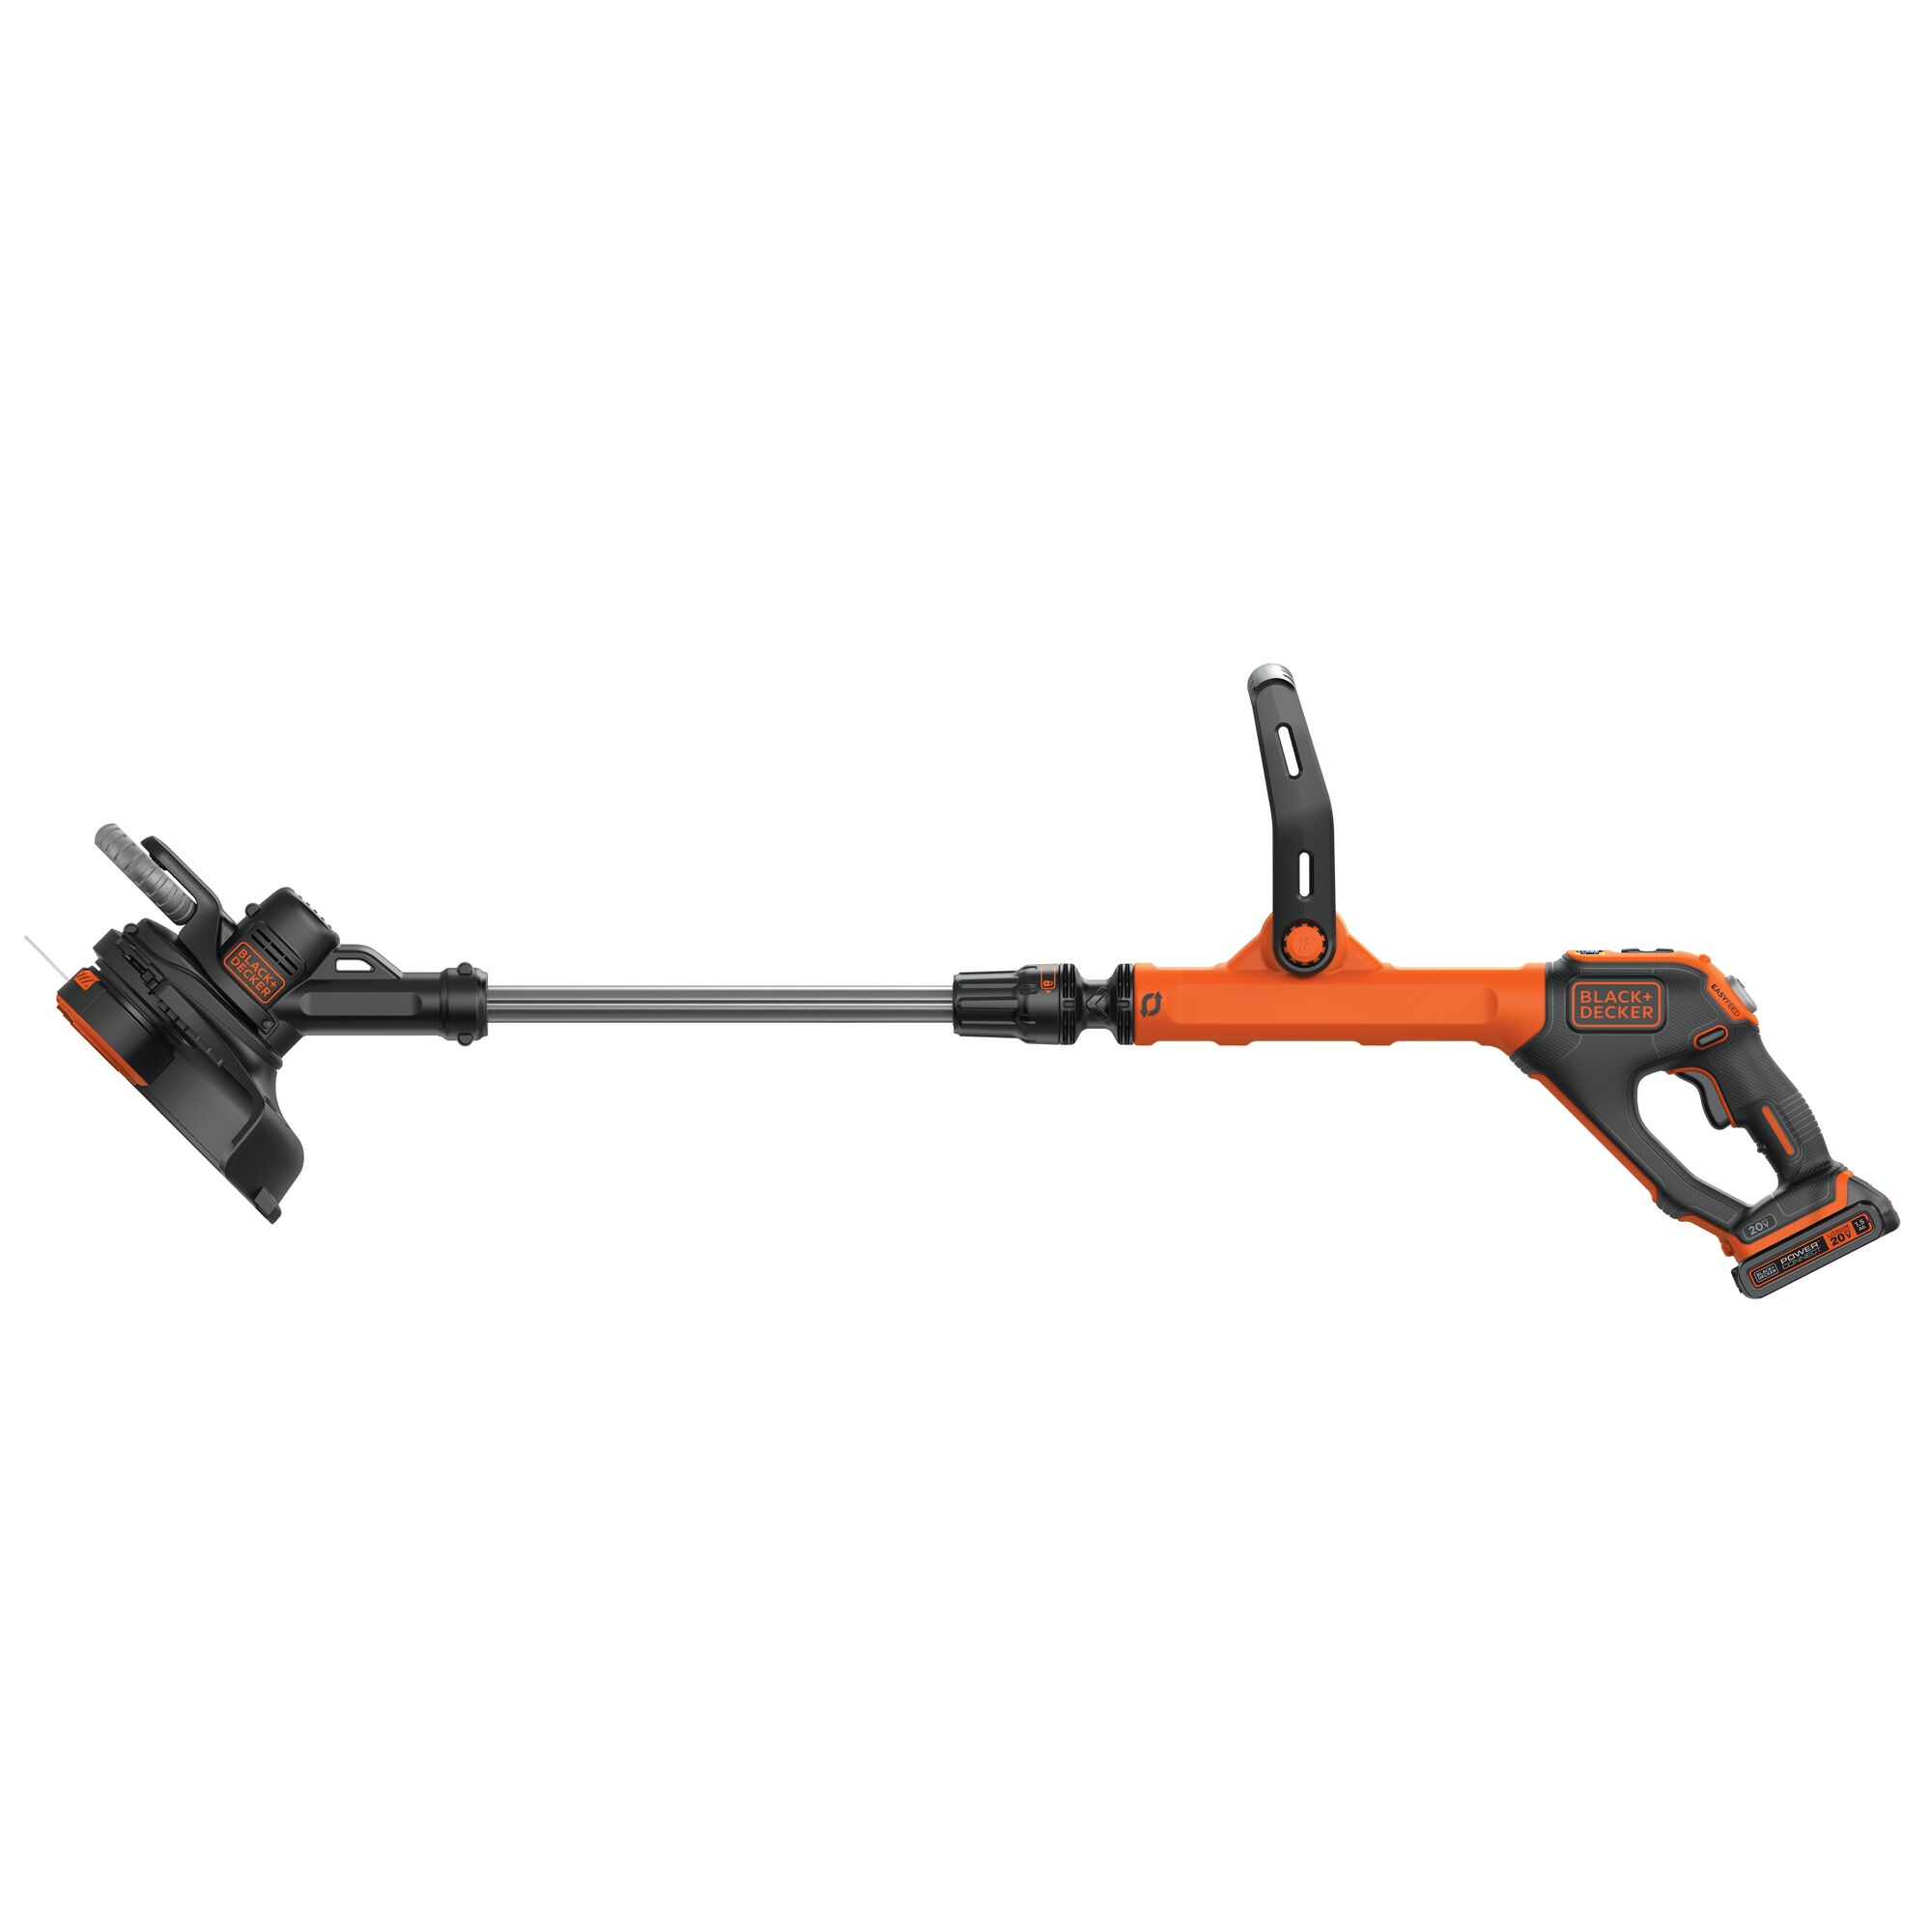 Profile of 20V Max Lithium Easyfeed string Trimmer/Edger on white background.